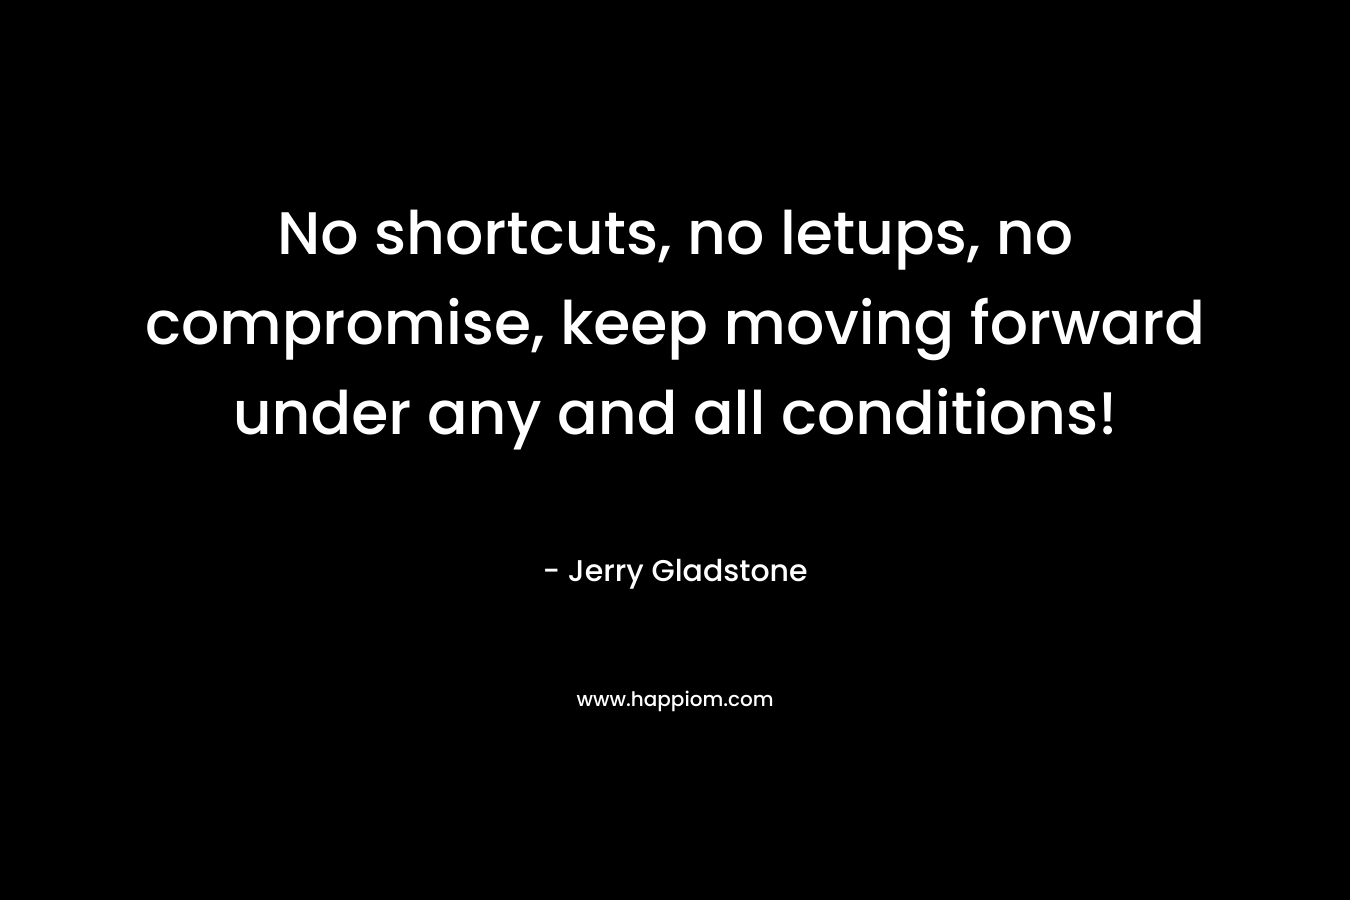 No shortcuts, no letups, no compromise, keep moving forward under any and all conditions!